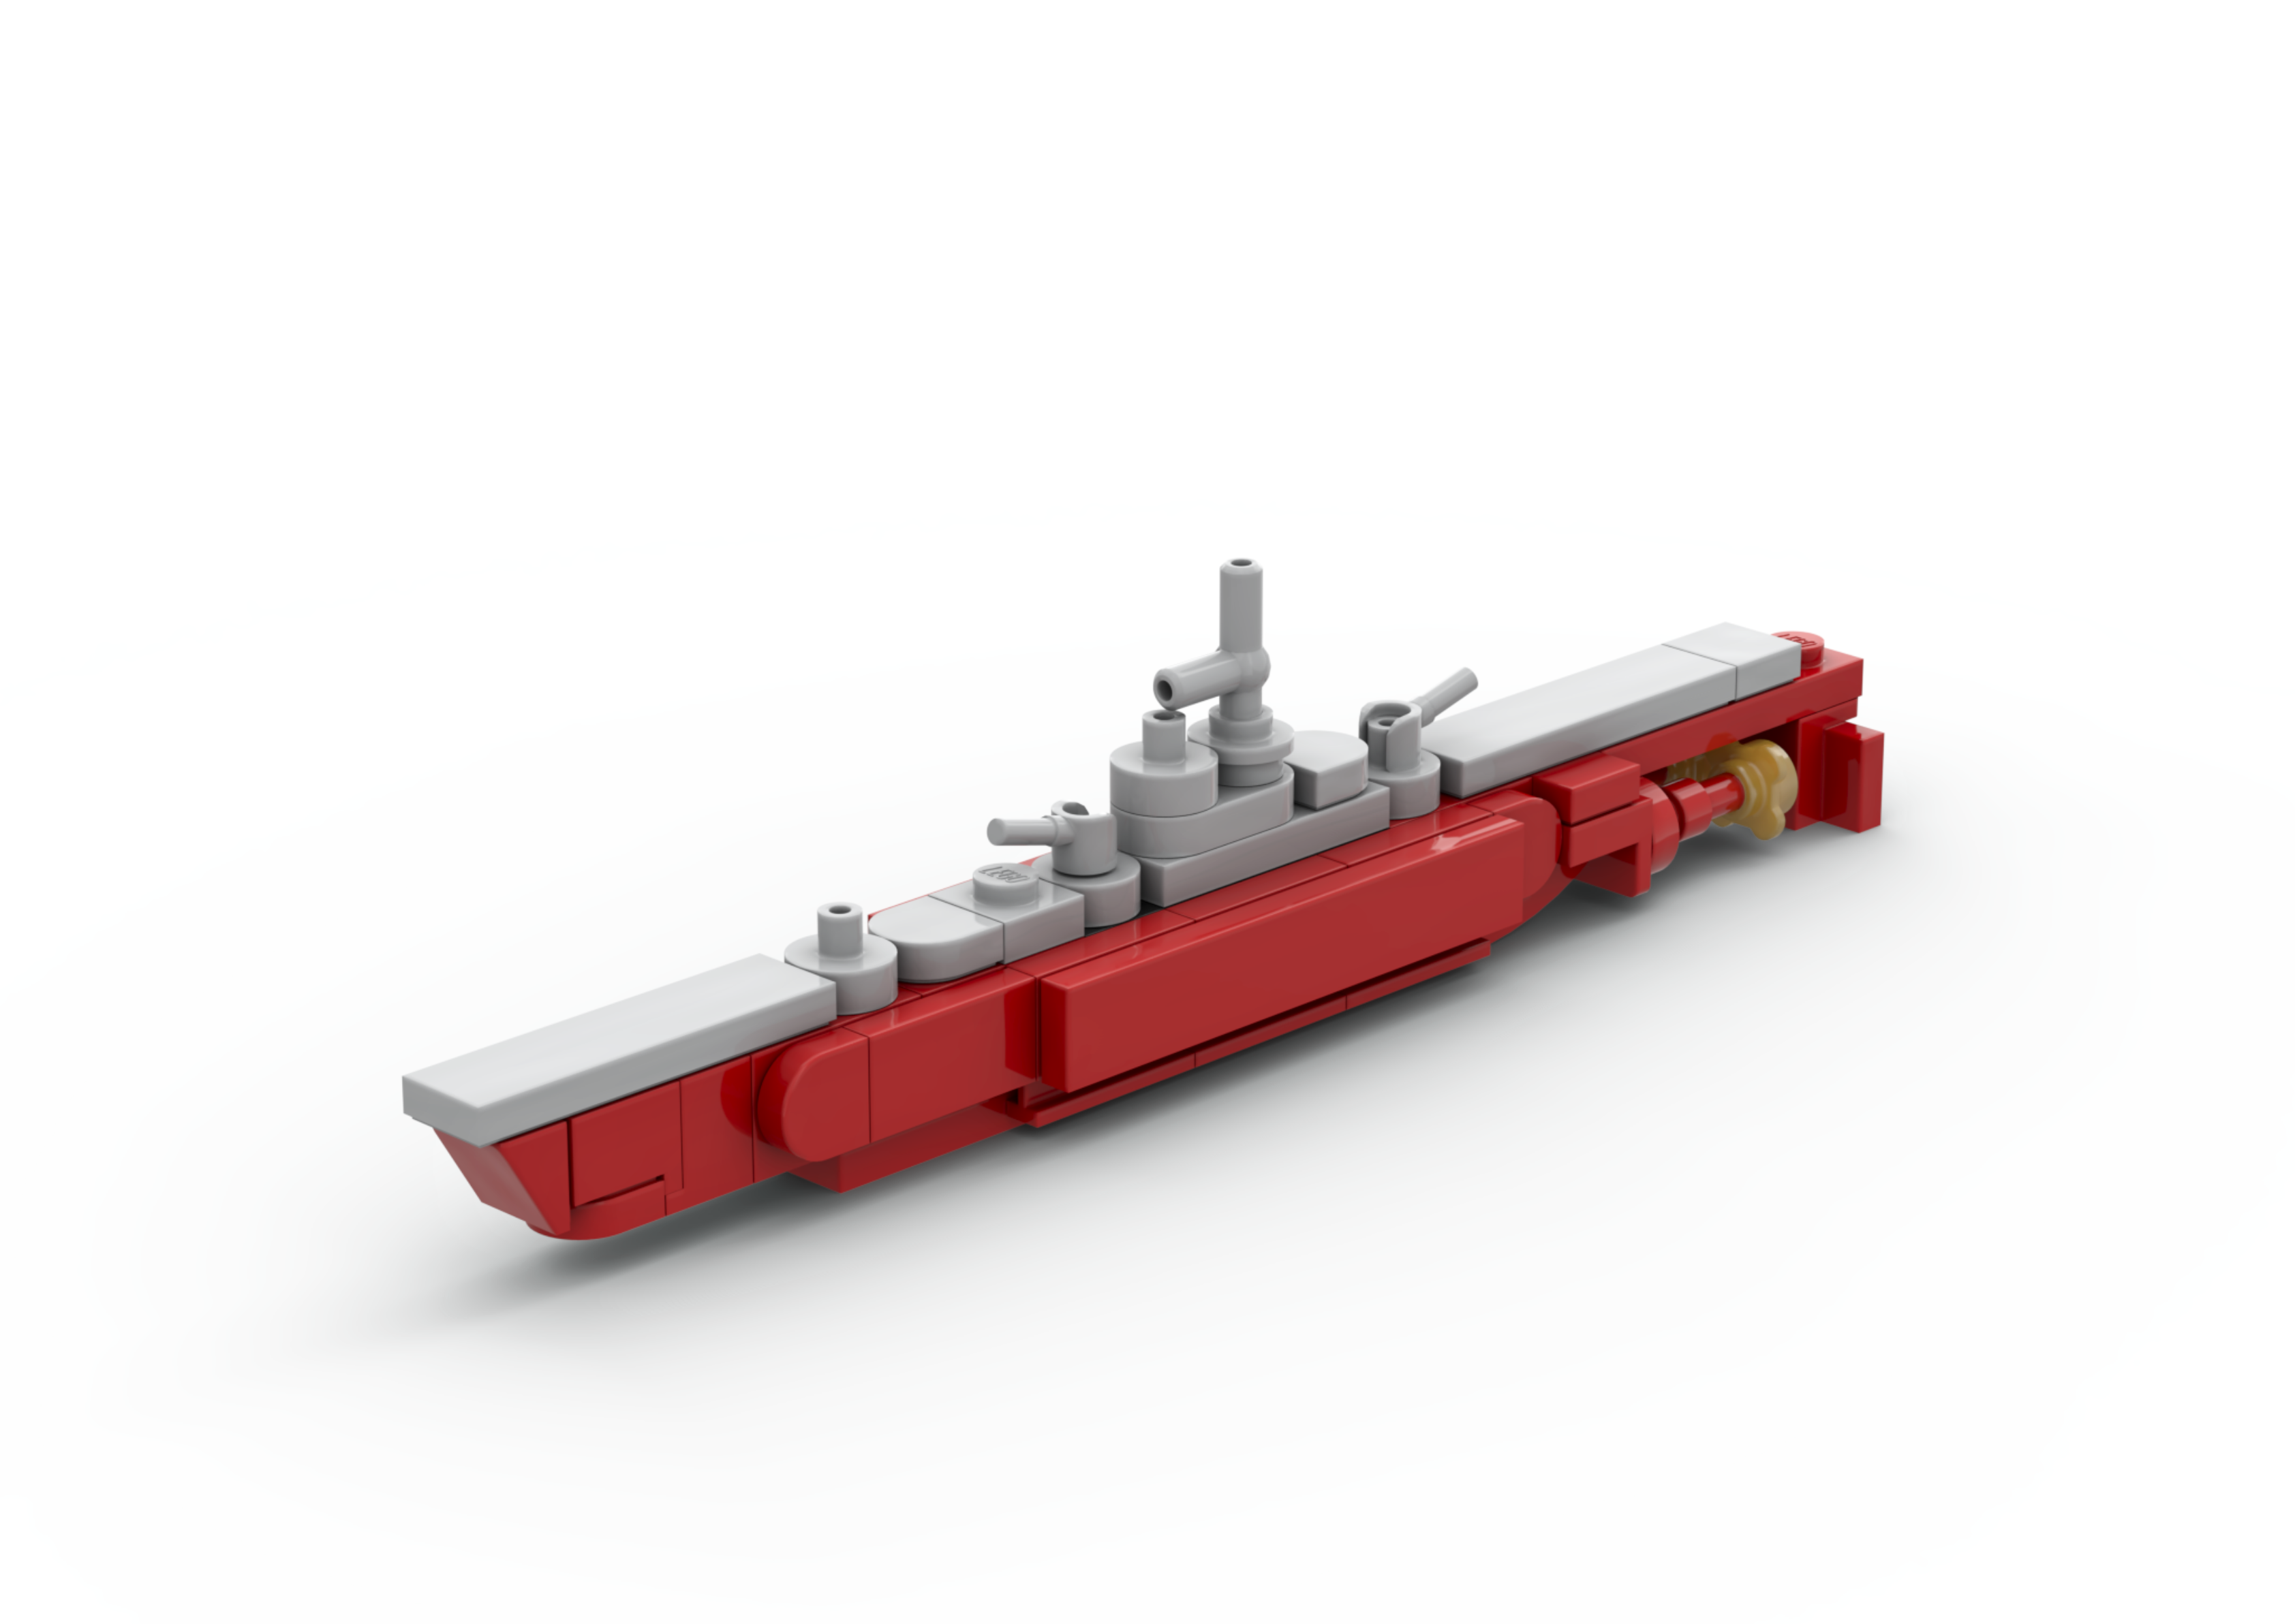 3D rendered image of the LEGO Archimede Class Submarine MOC.